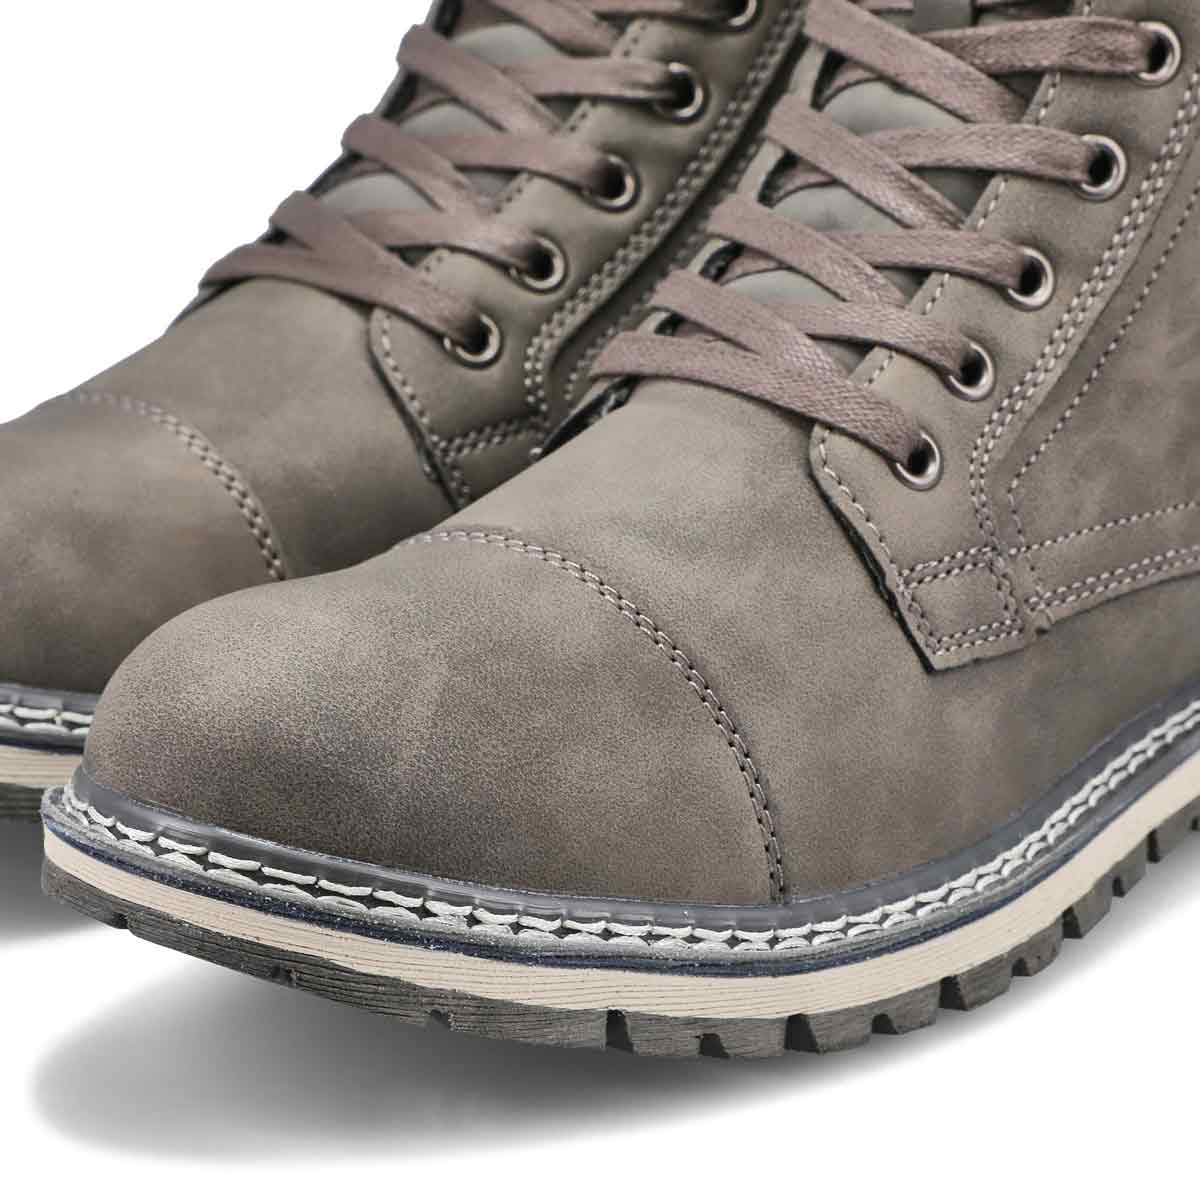 SoftMoc Men's Bucky Ankle Boot - Taupe | SoftMoc.com